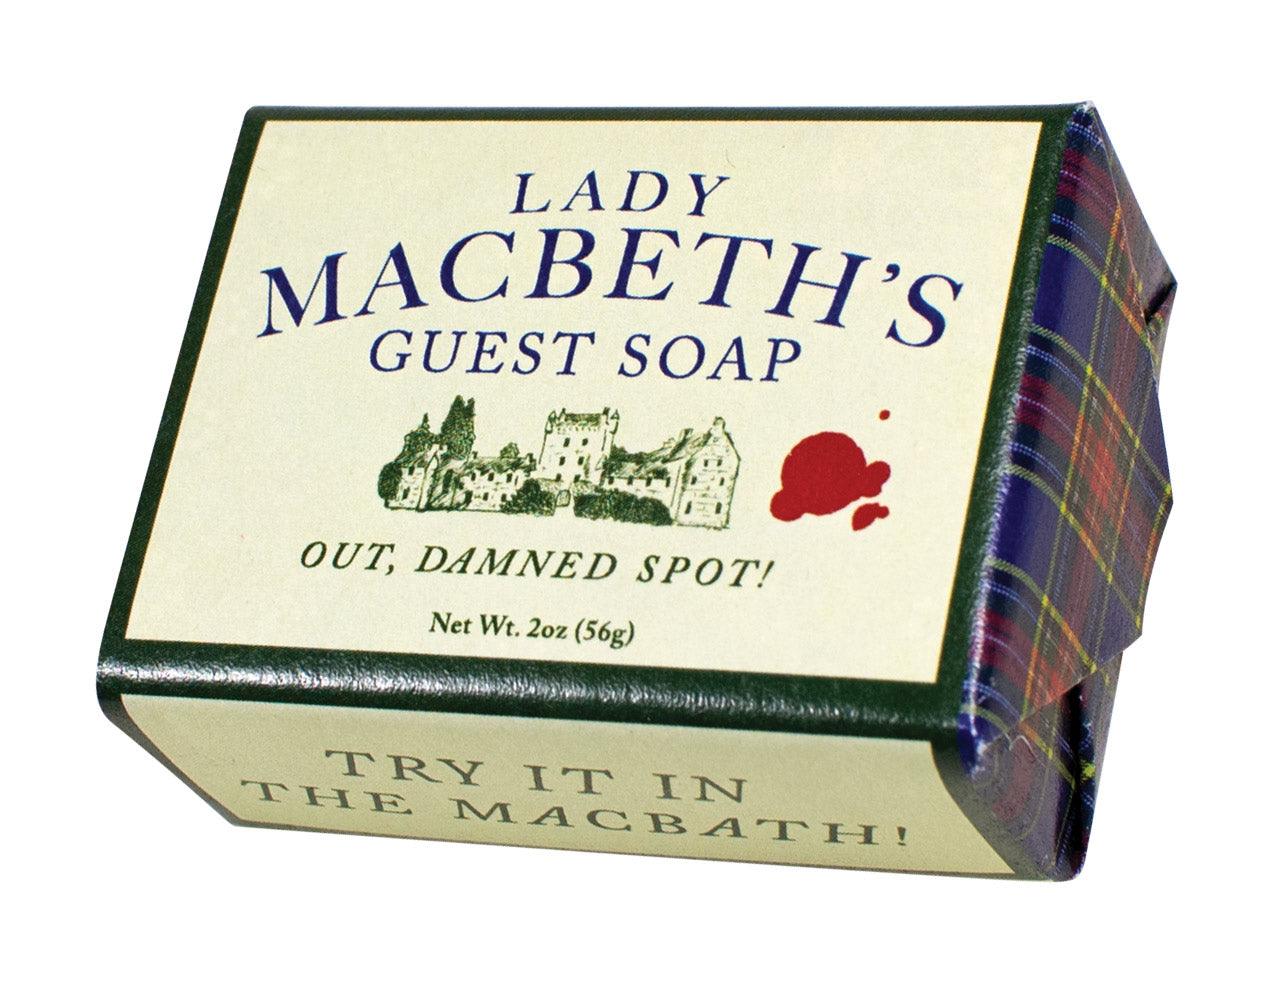 Product photo of Lady Macbeth's Guest Soap, a novelty gift manufactured by The Unemployed Philosophers Guild.